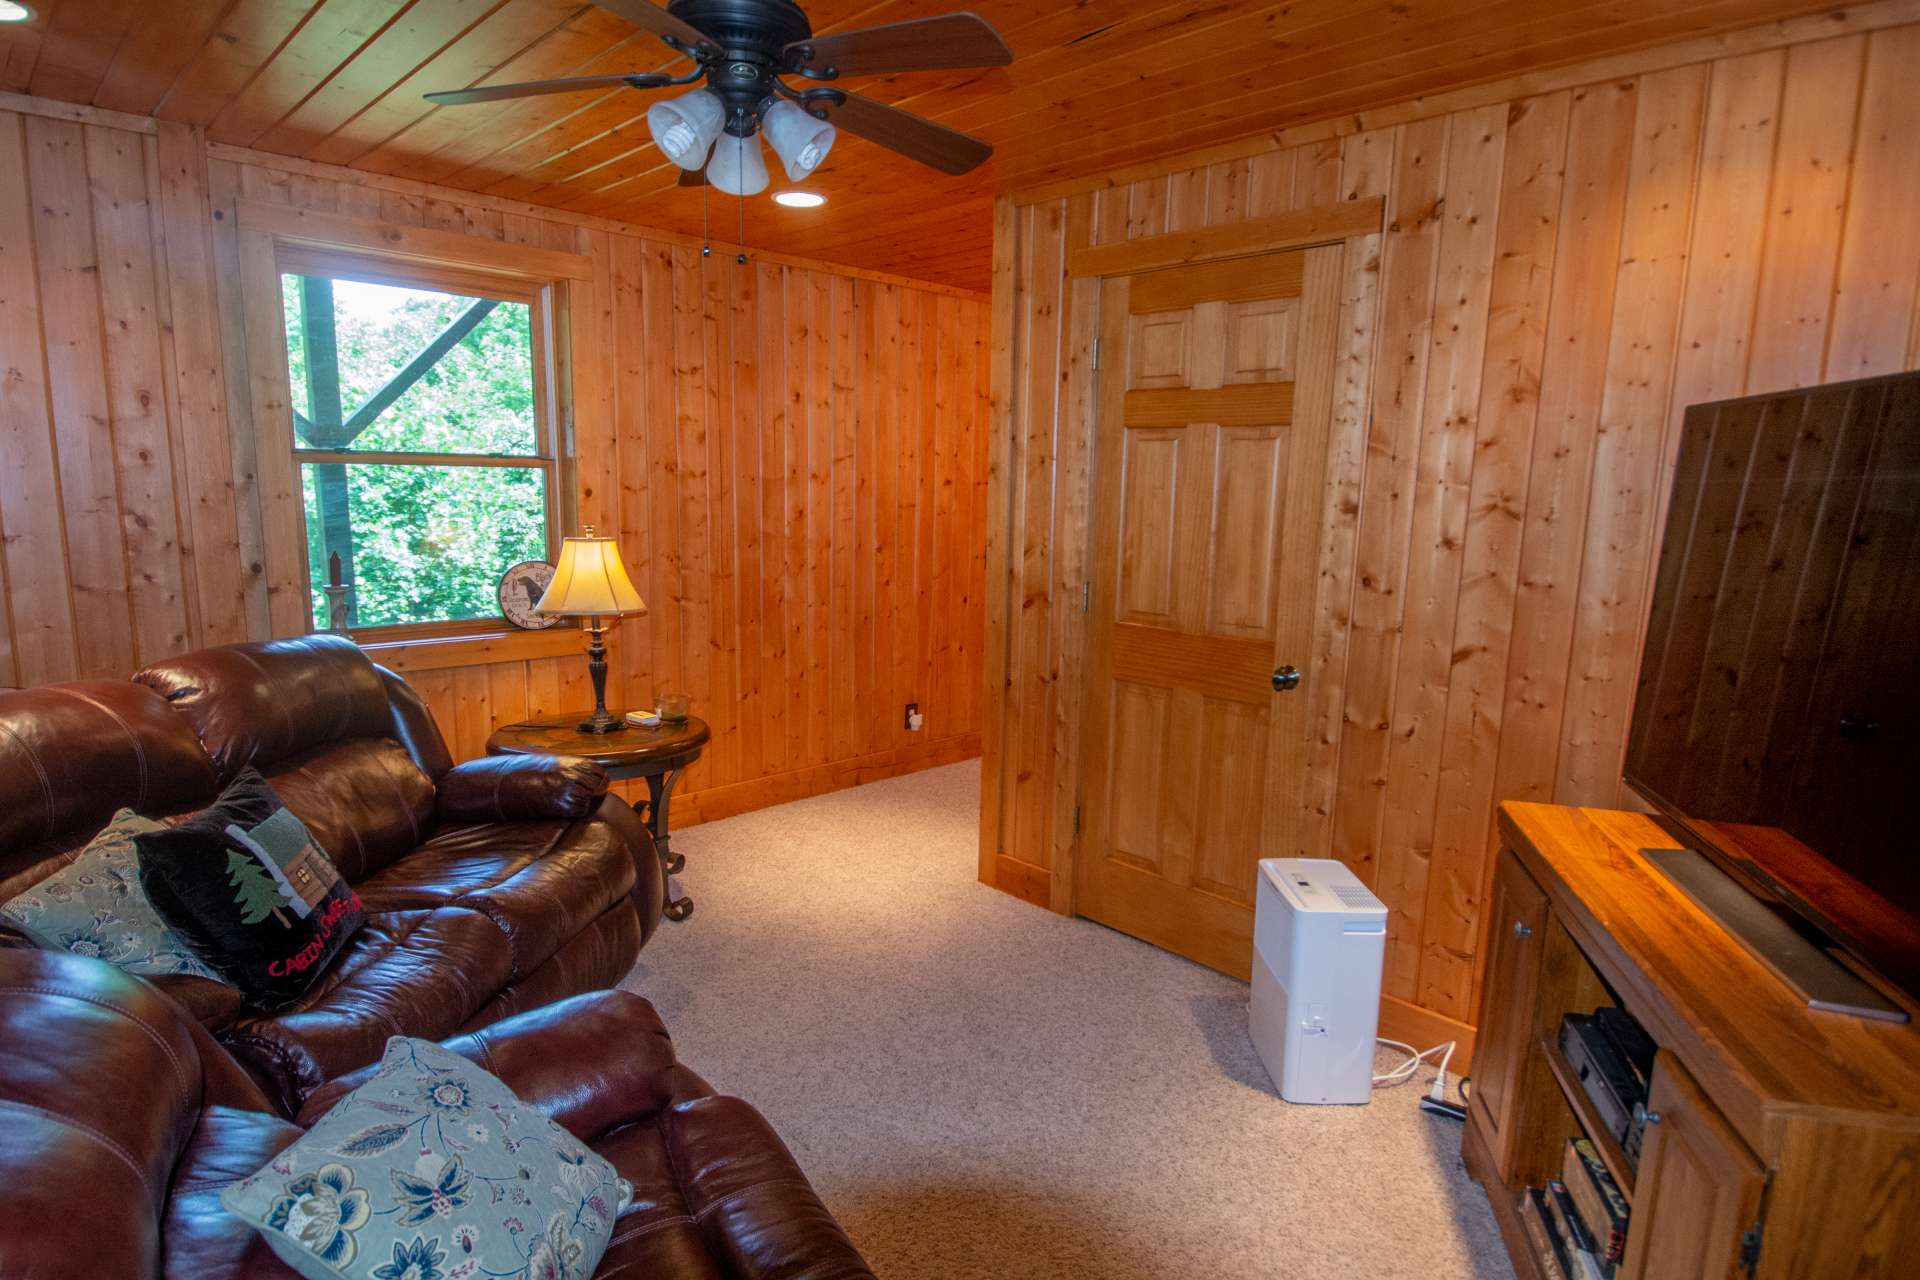 The lower level offers finished living space and a half bath.